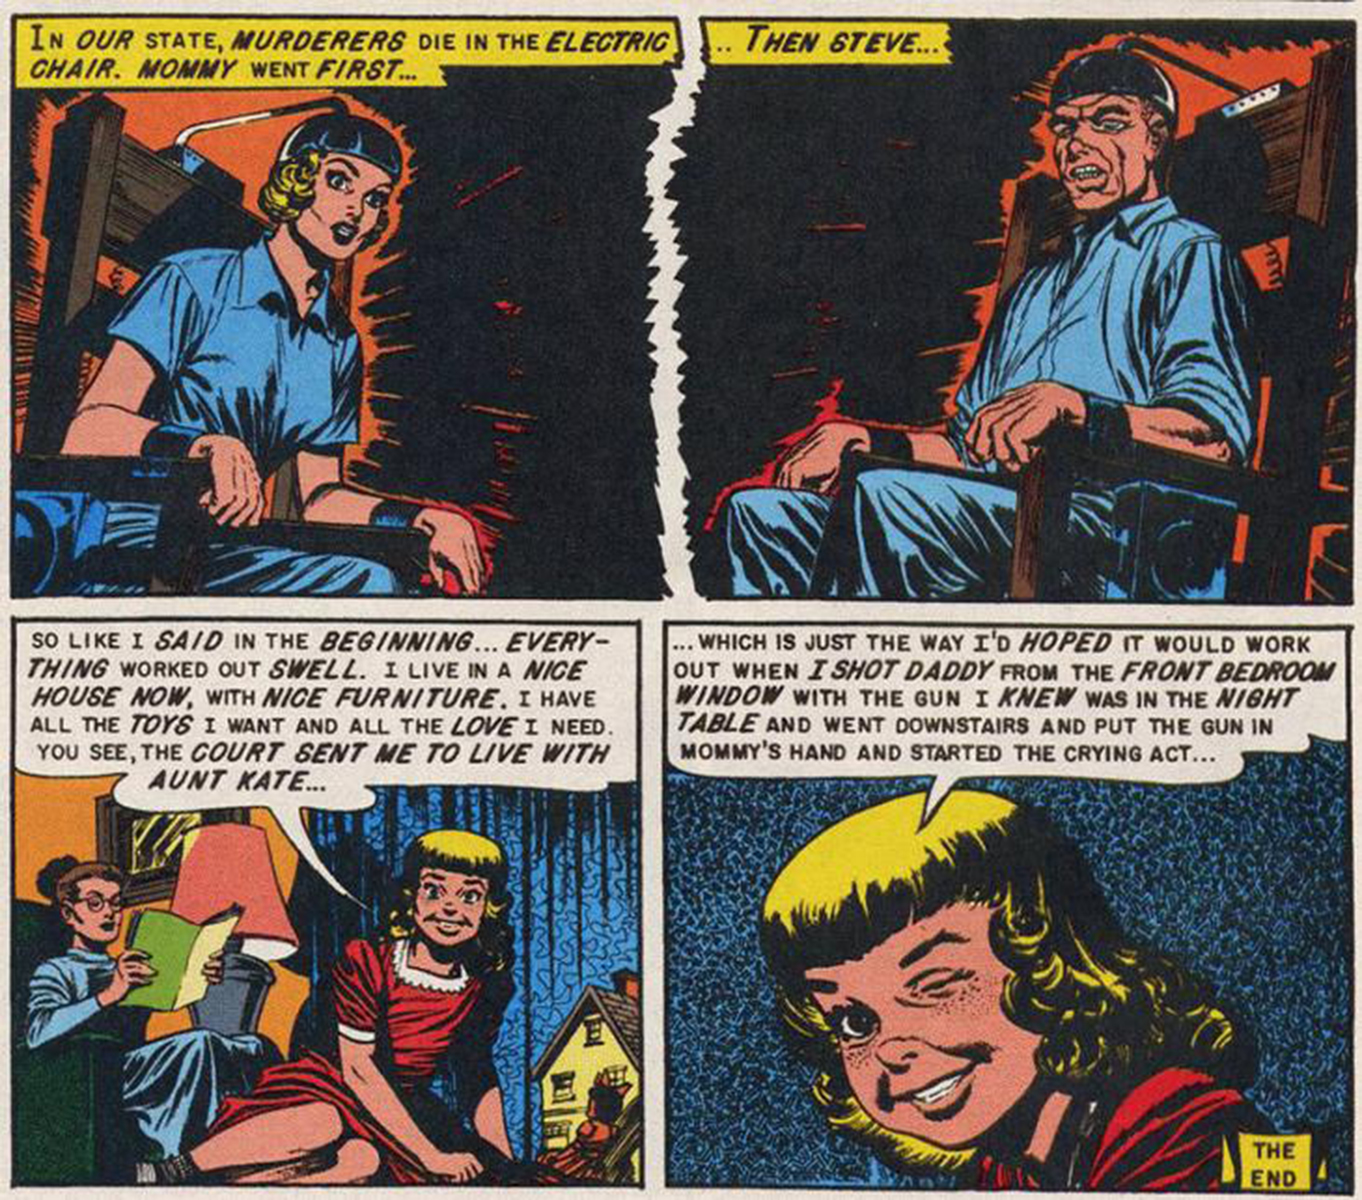 Image of “electric chair” comic